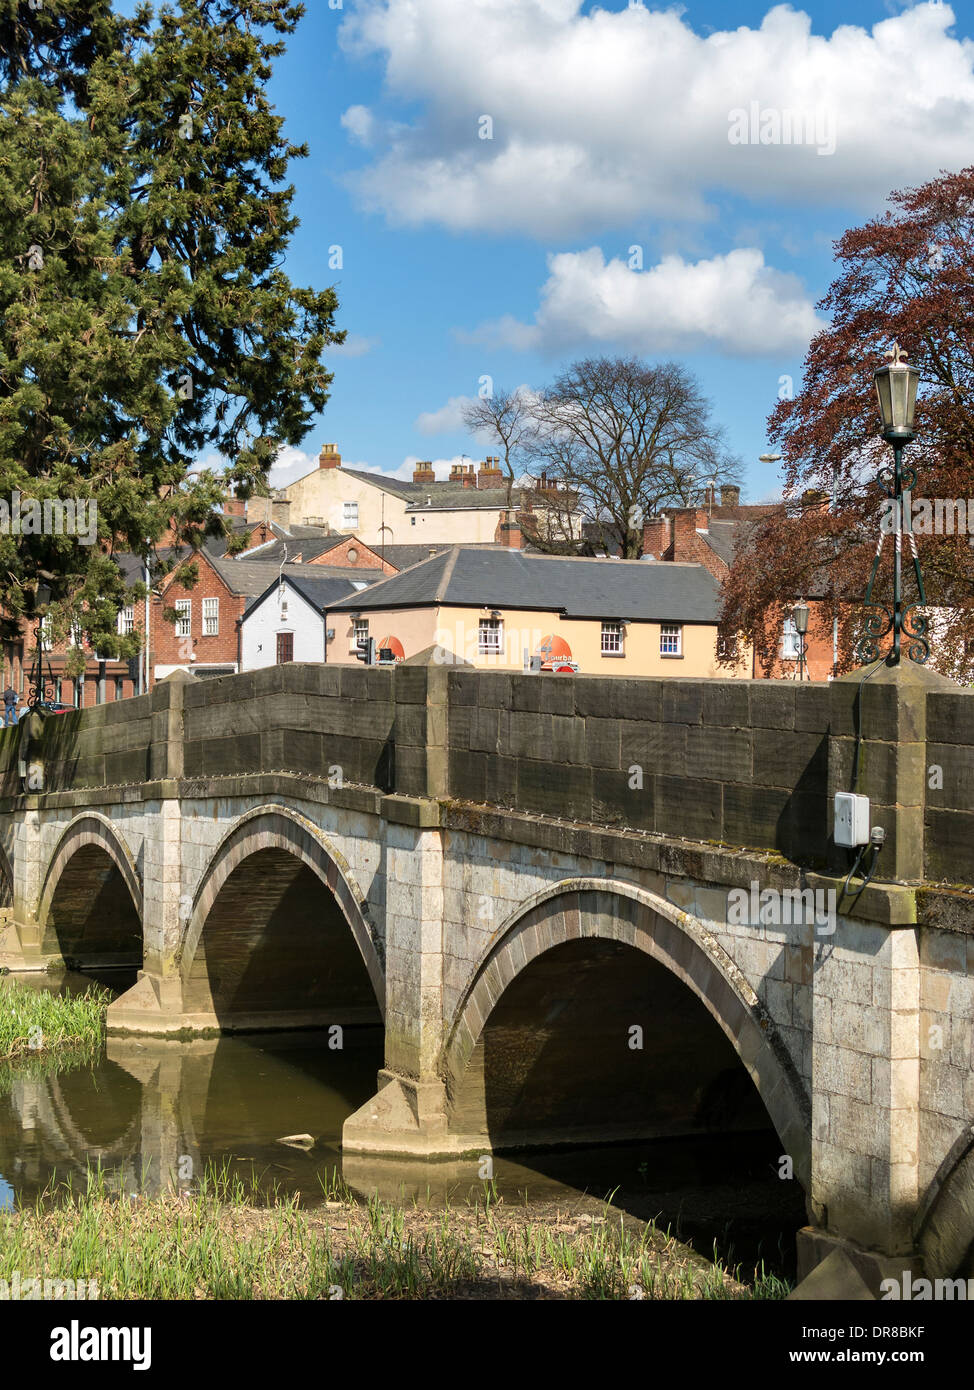 The stone arches of Lady Wilton bridge, over the River Eye with town centre buildings beyond, Melton Mowbray. Stock Photo